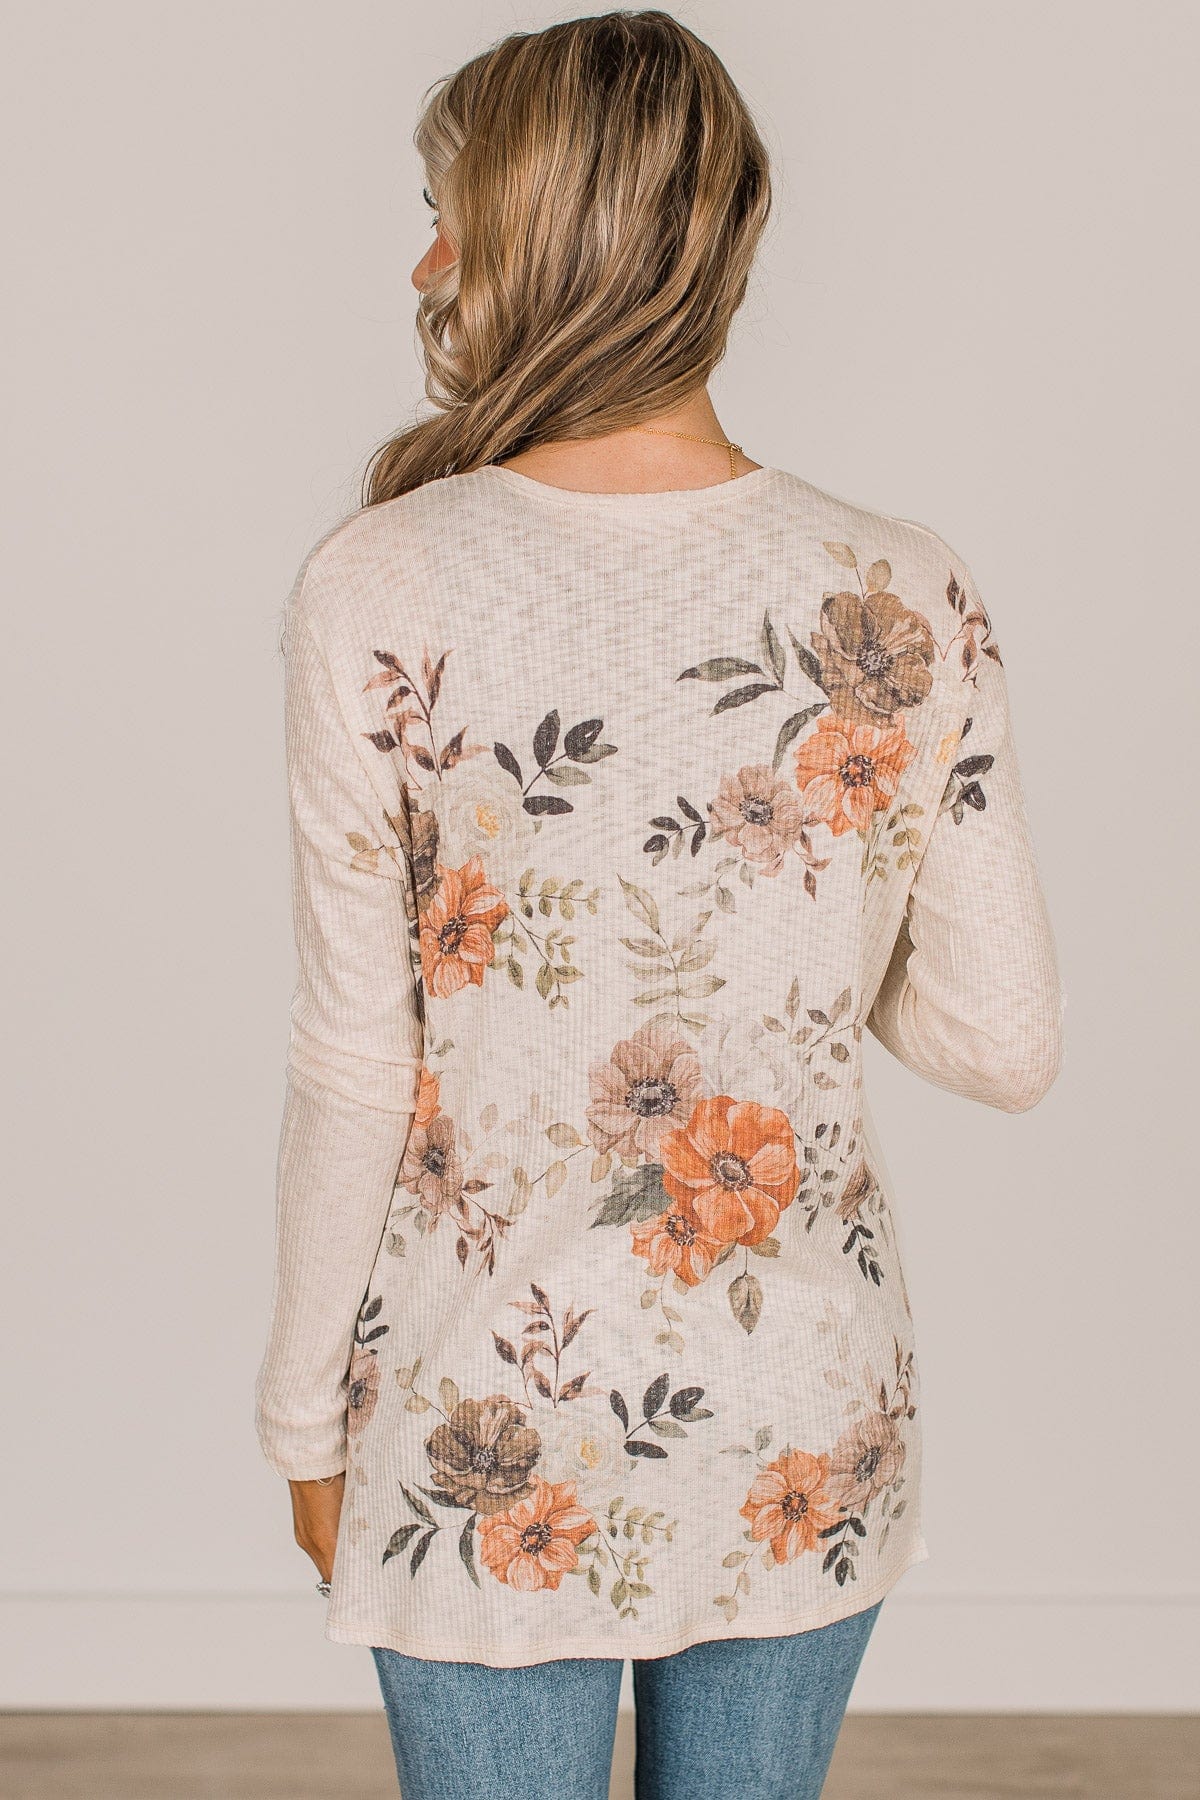 Happiness Guaranteed Floral Knit Cardigan- Cream – The Pulse Boutique